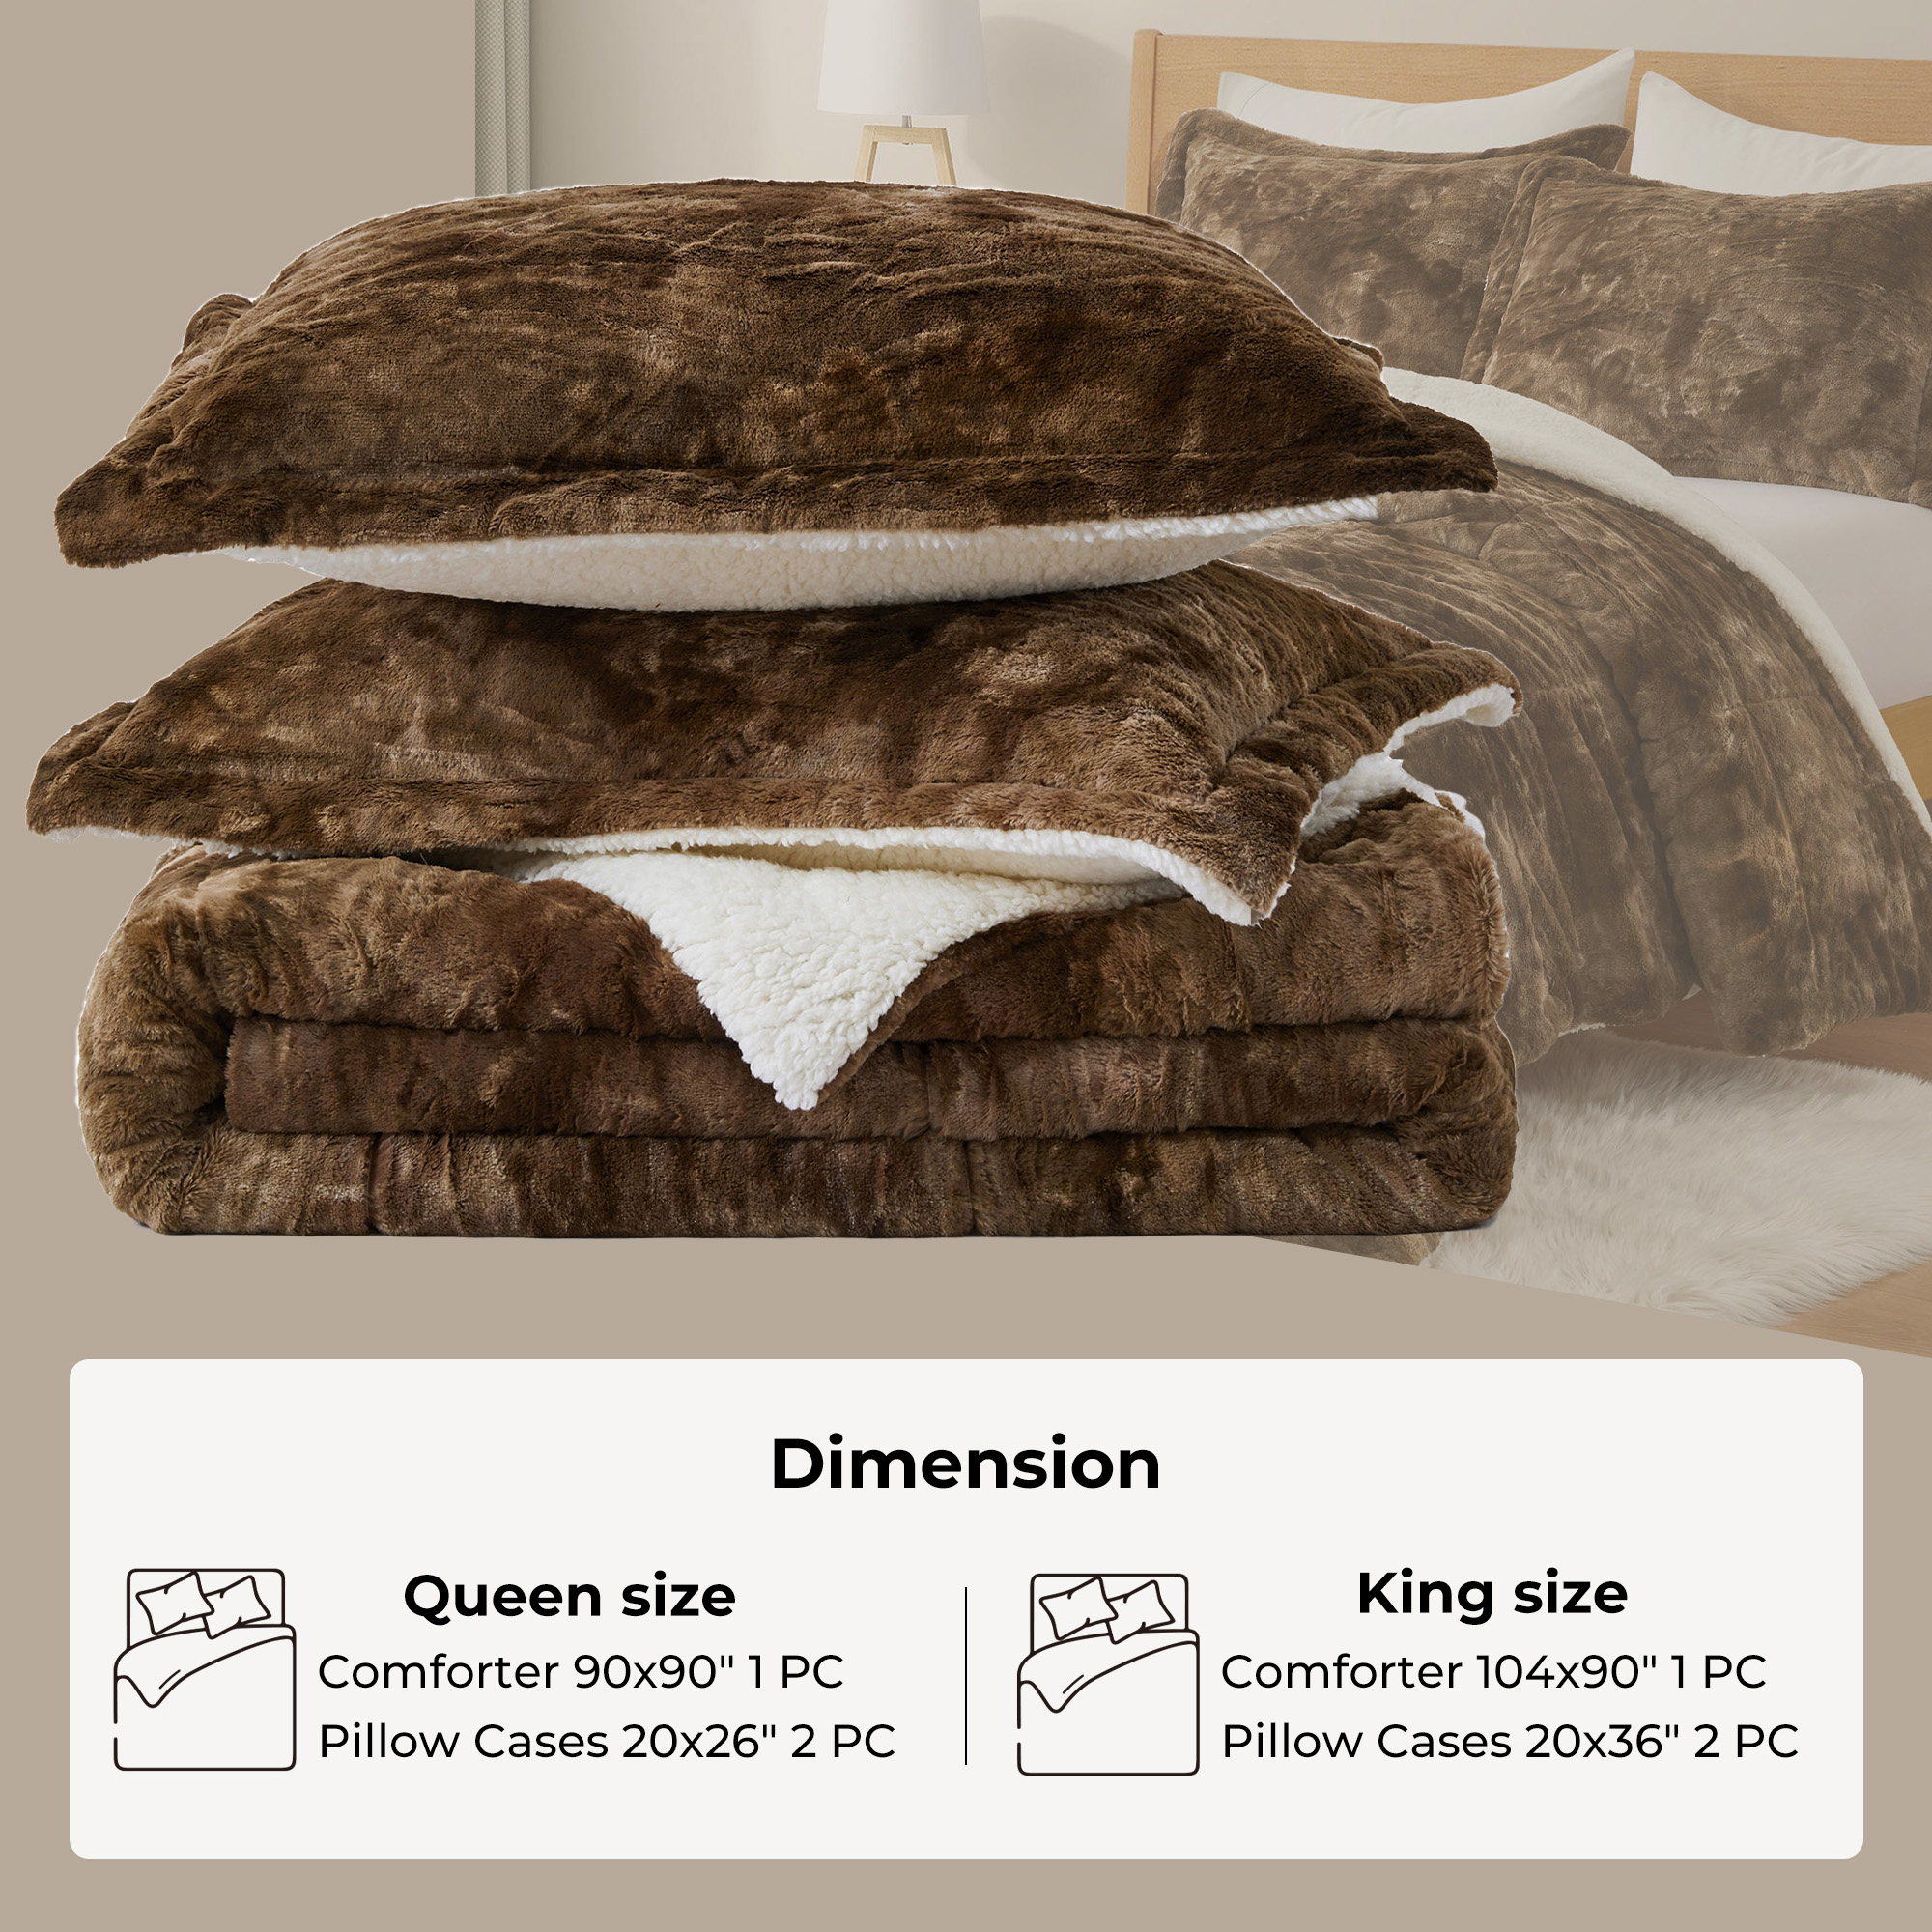 3 Piece All Season Comforter Set With Shams Reversible Faux Shearling-Down Alternative Comforter Set - Tiger Brown, King Size-10490